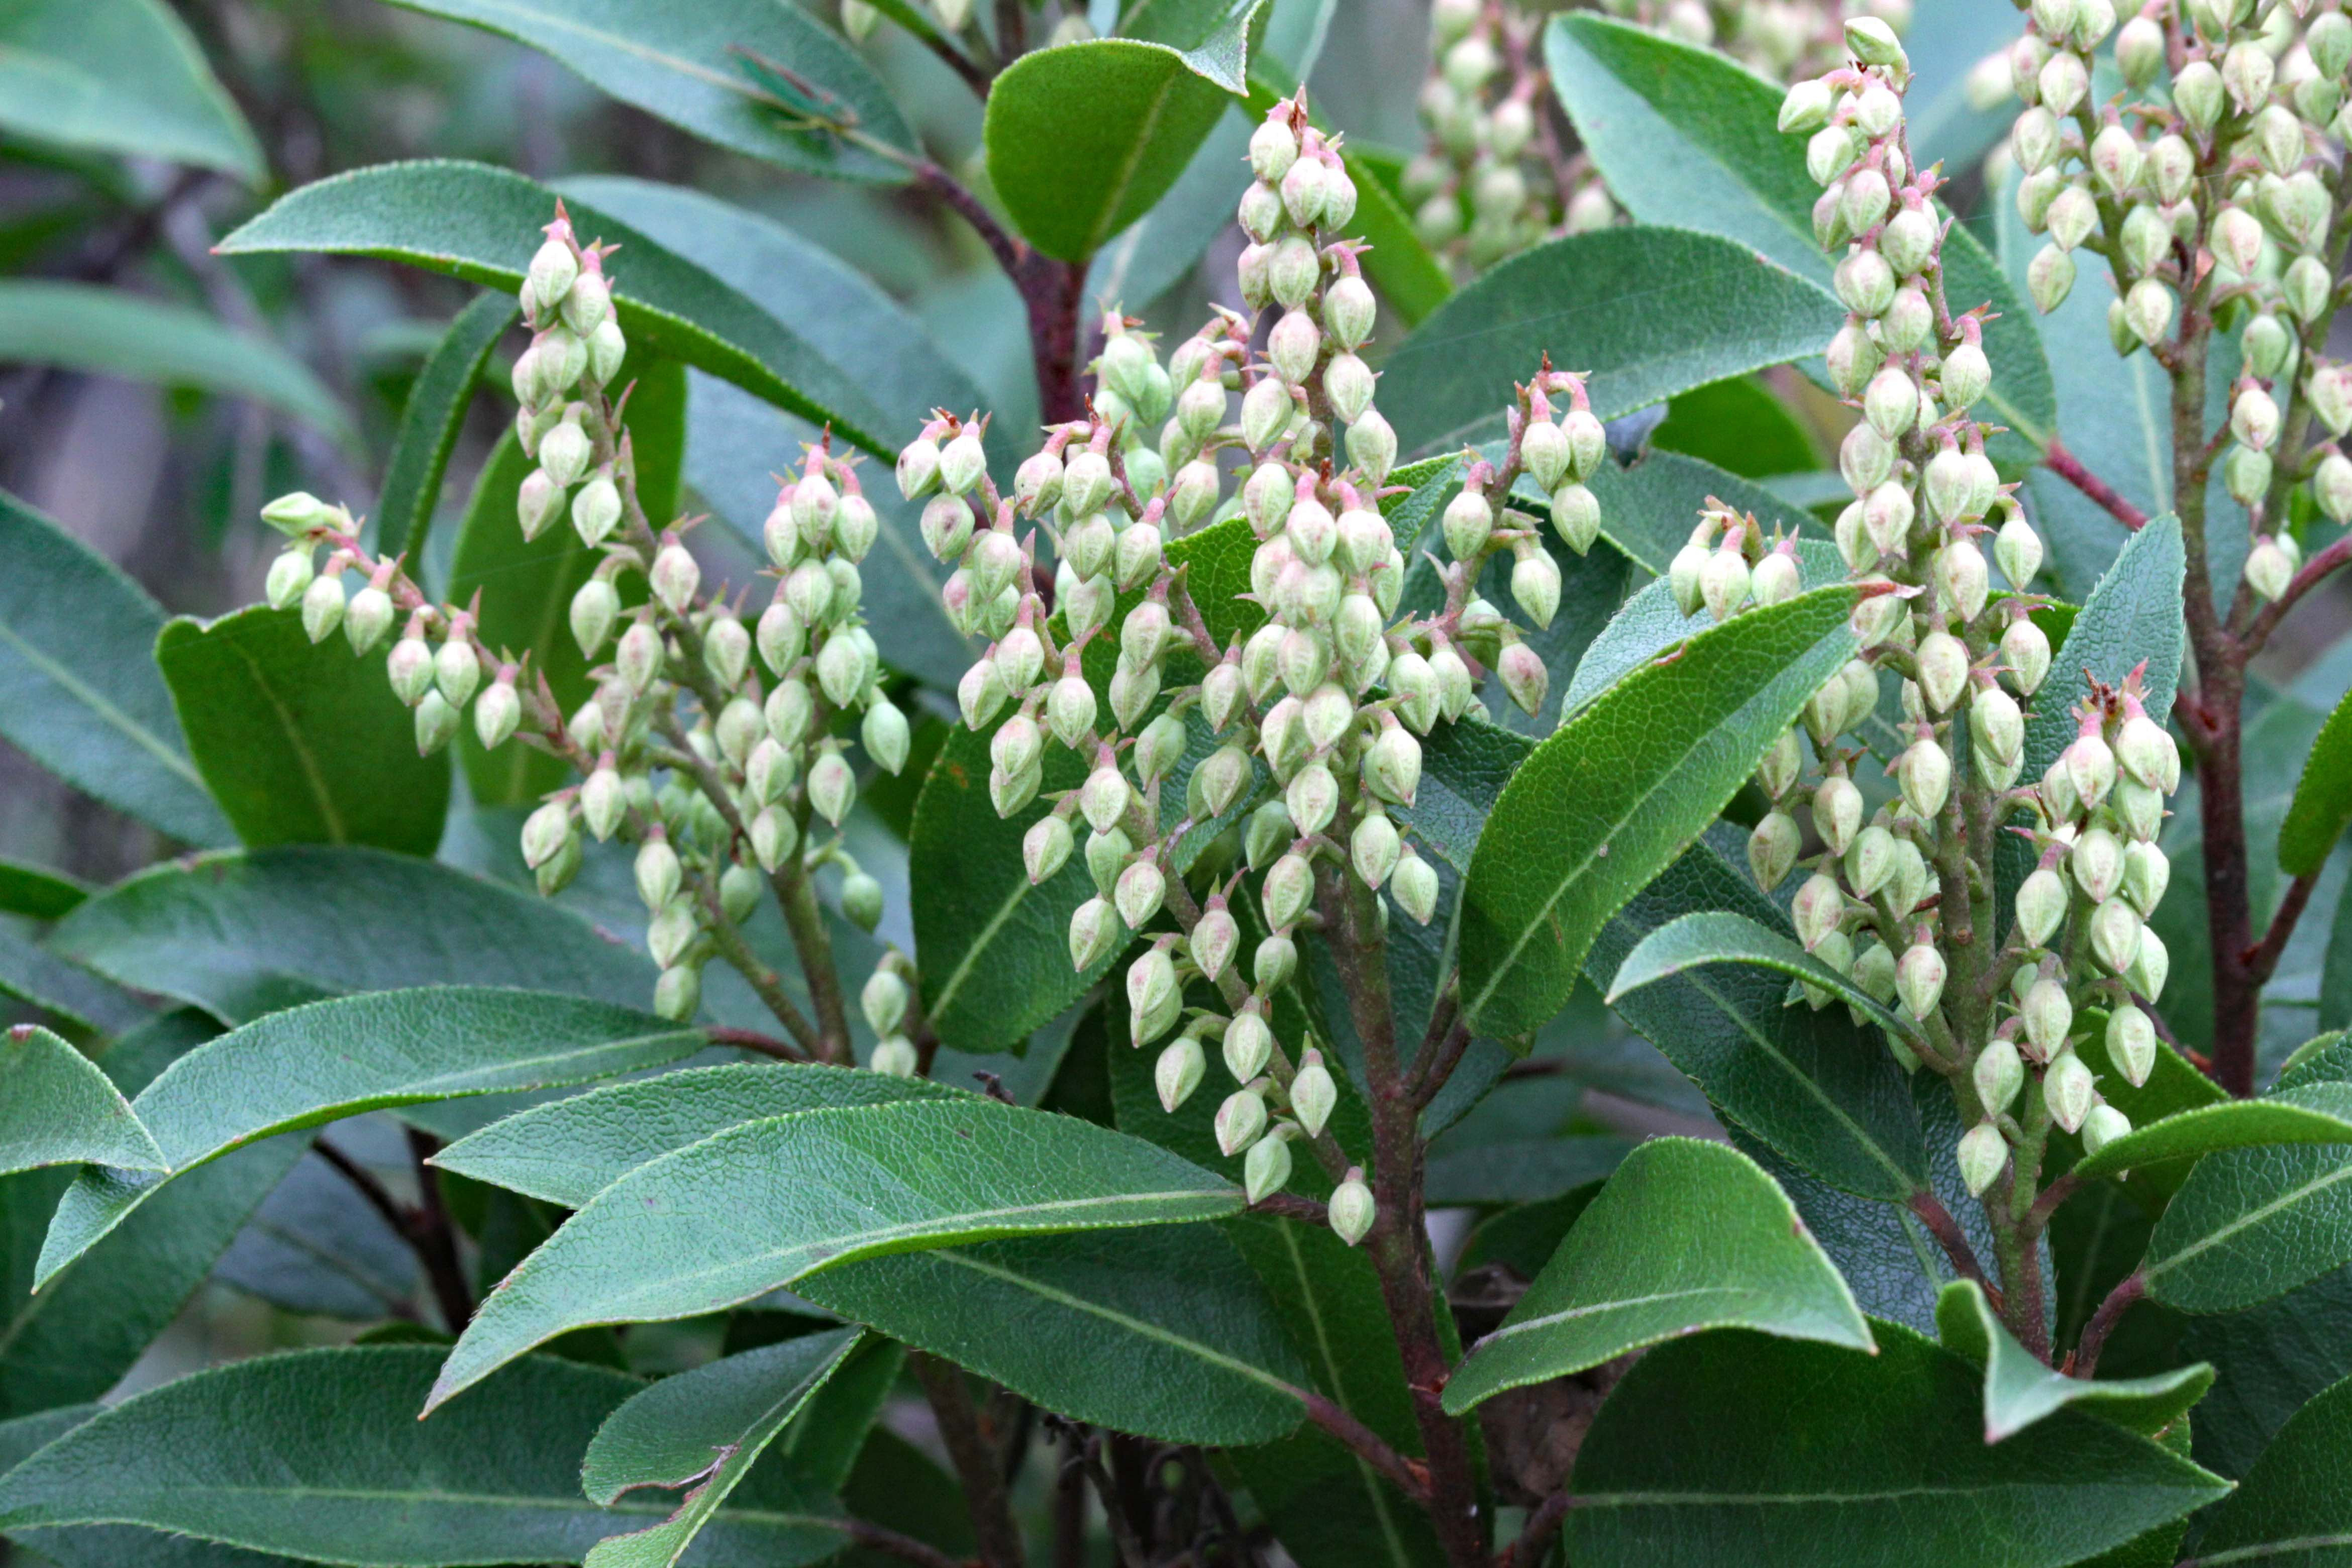 The Scientific Name is Pieris floribunda. You will likely hear them called Mountain Andromeda, Evergreen Mountain Fetterbush. This picture shows the Close-up of next year's flower buds. of Pieris floribunda